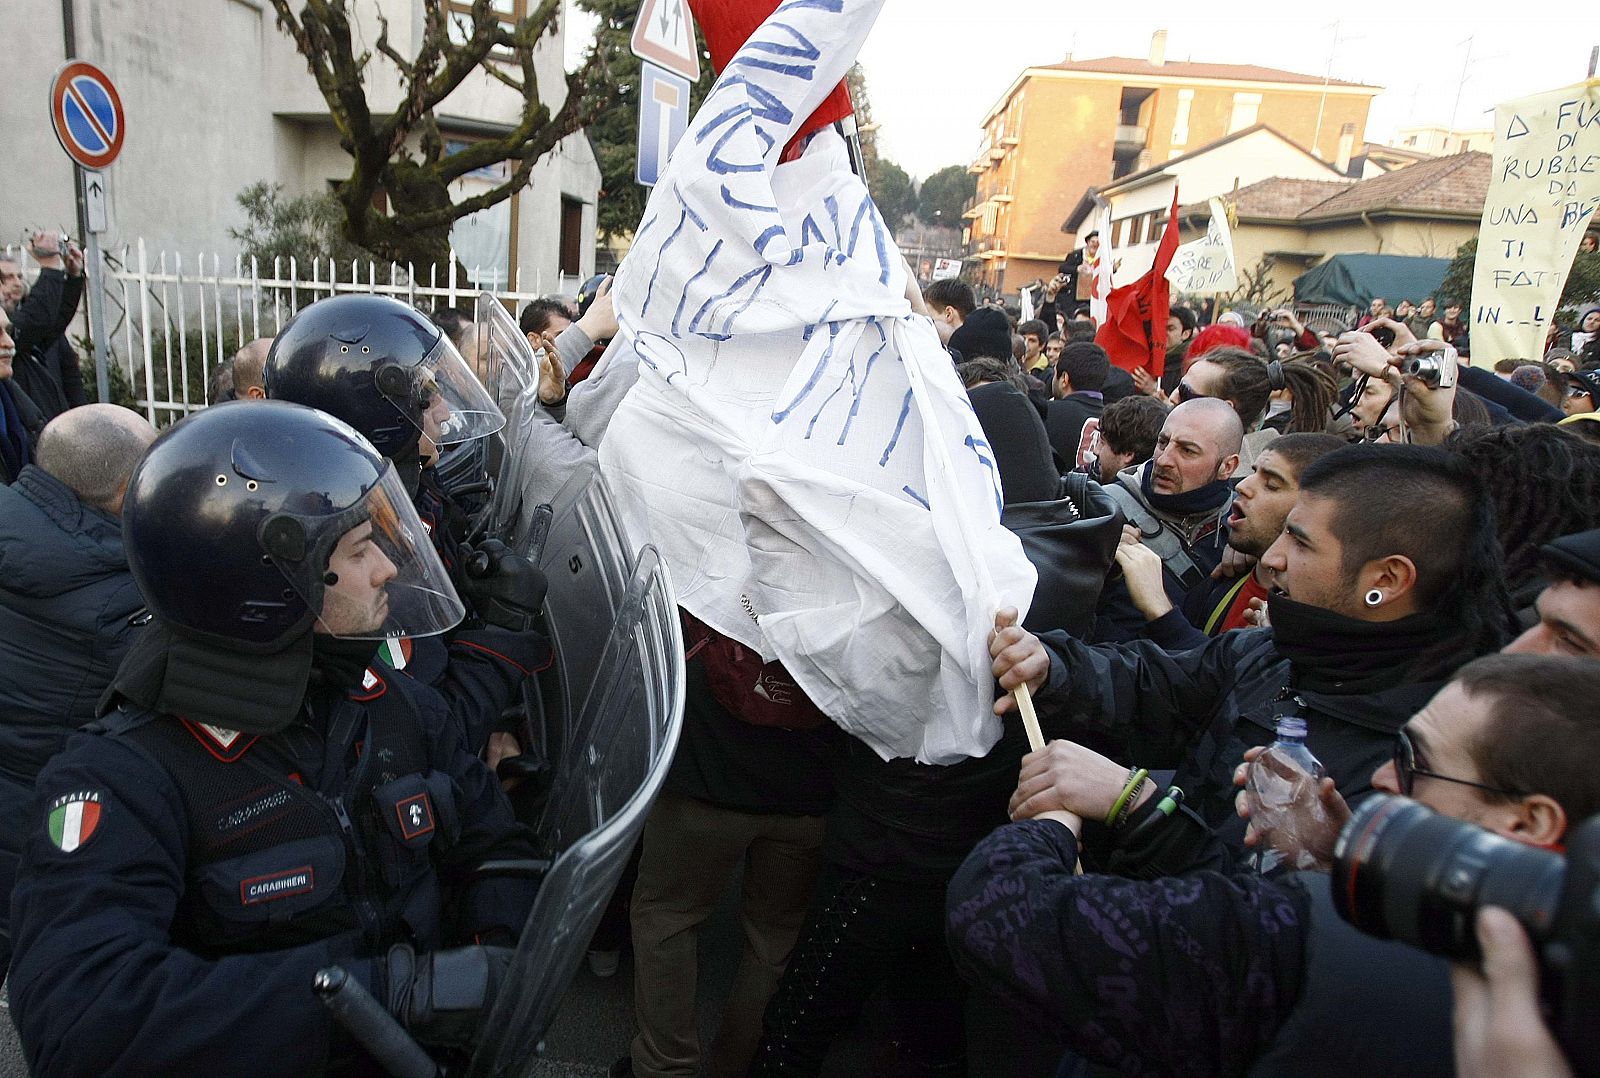 Demonstrators fight with police during a protest against Italian Prime Minister Silvio Berlusconi in Arcore